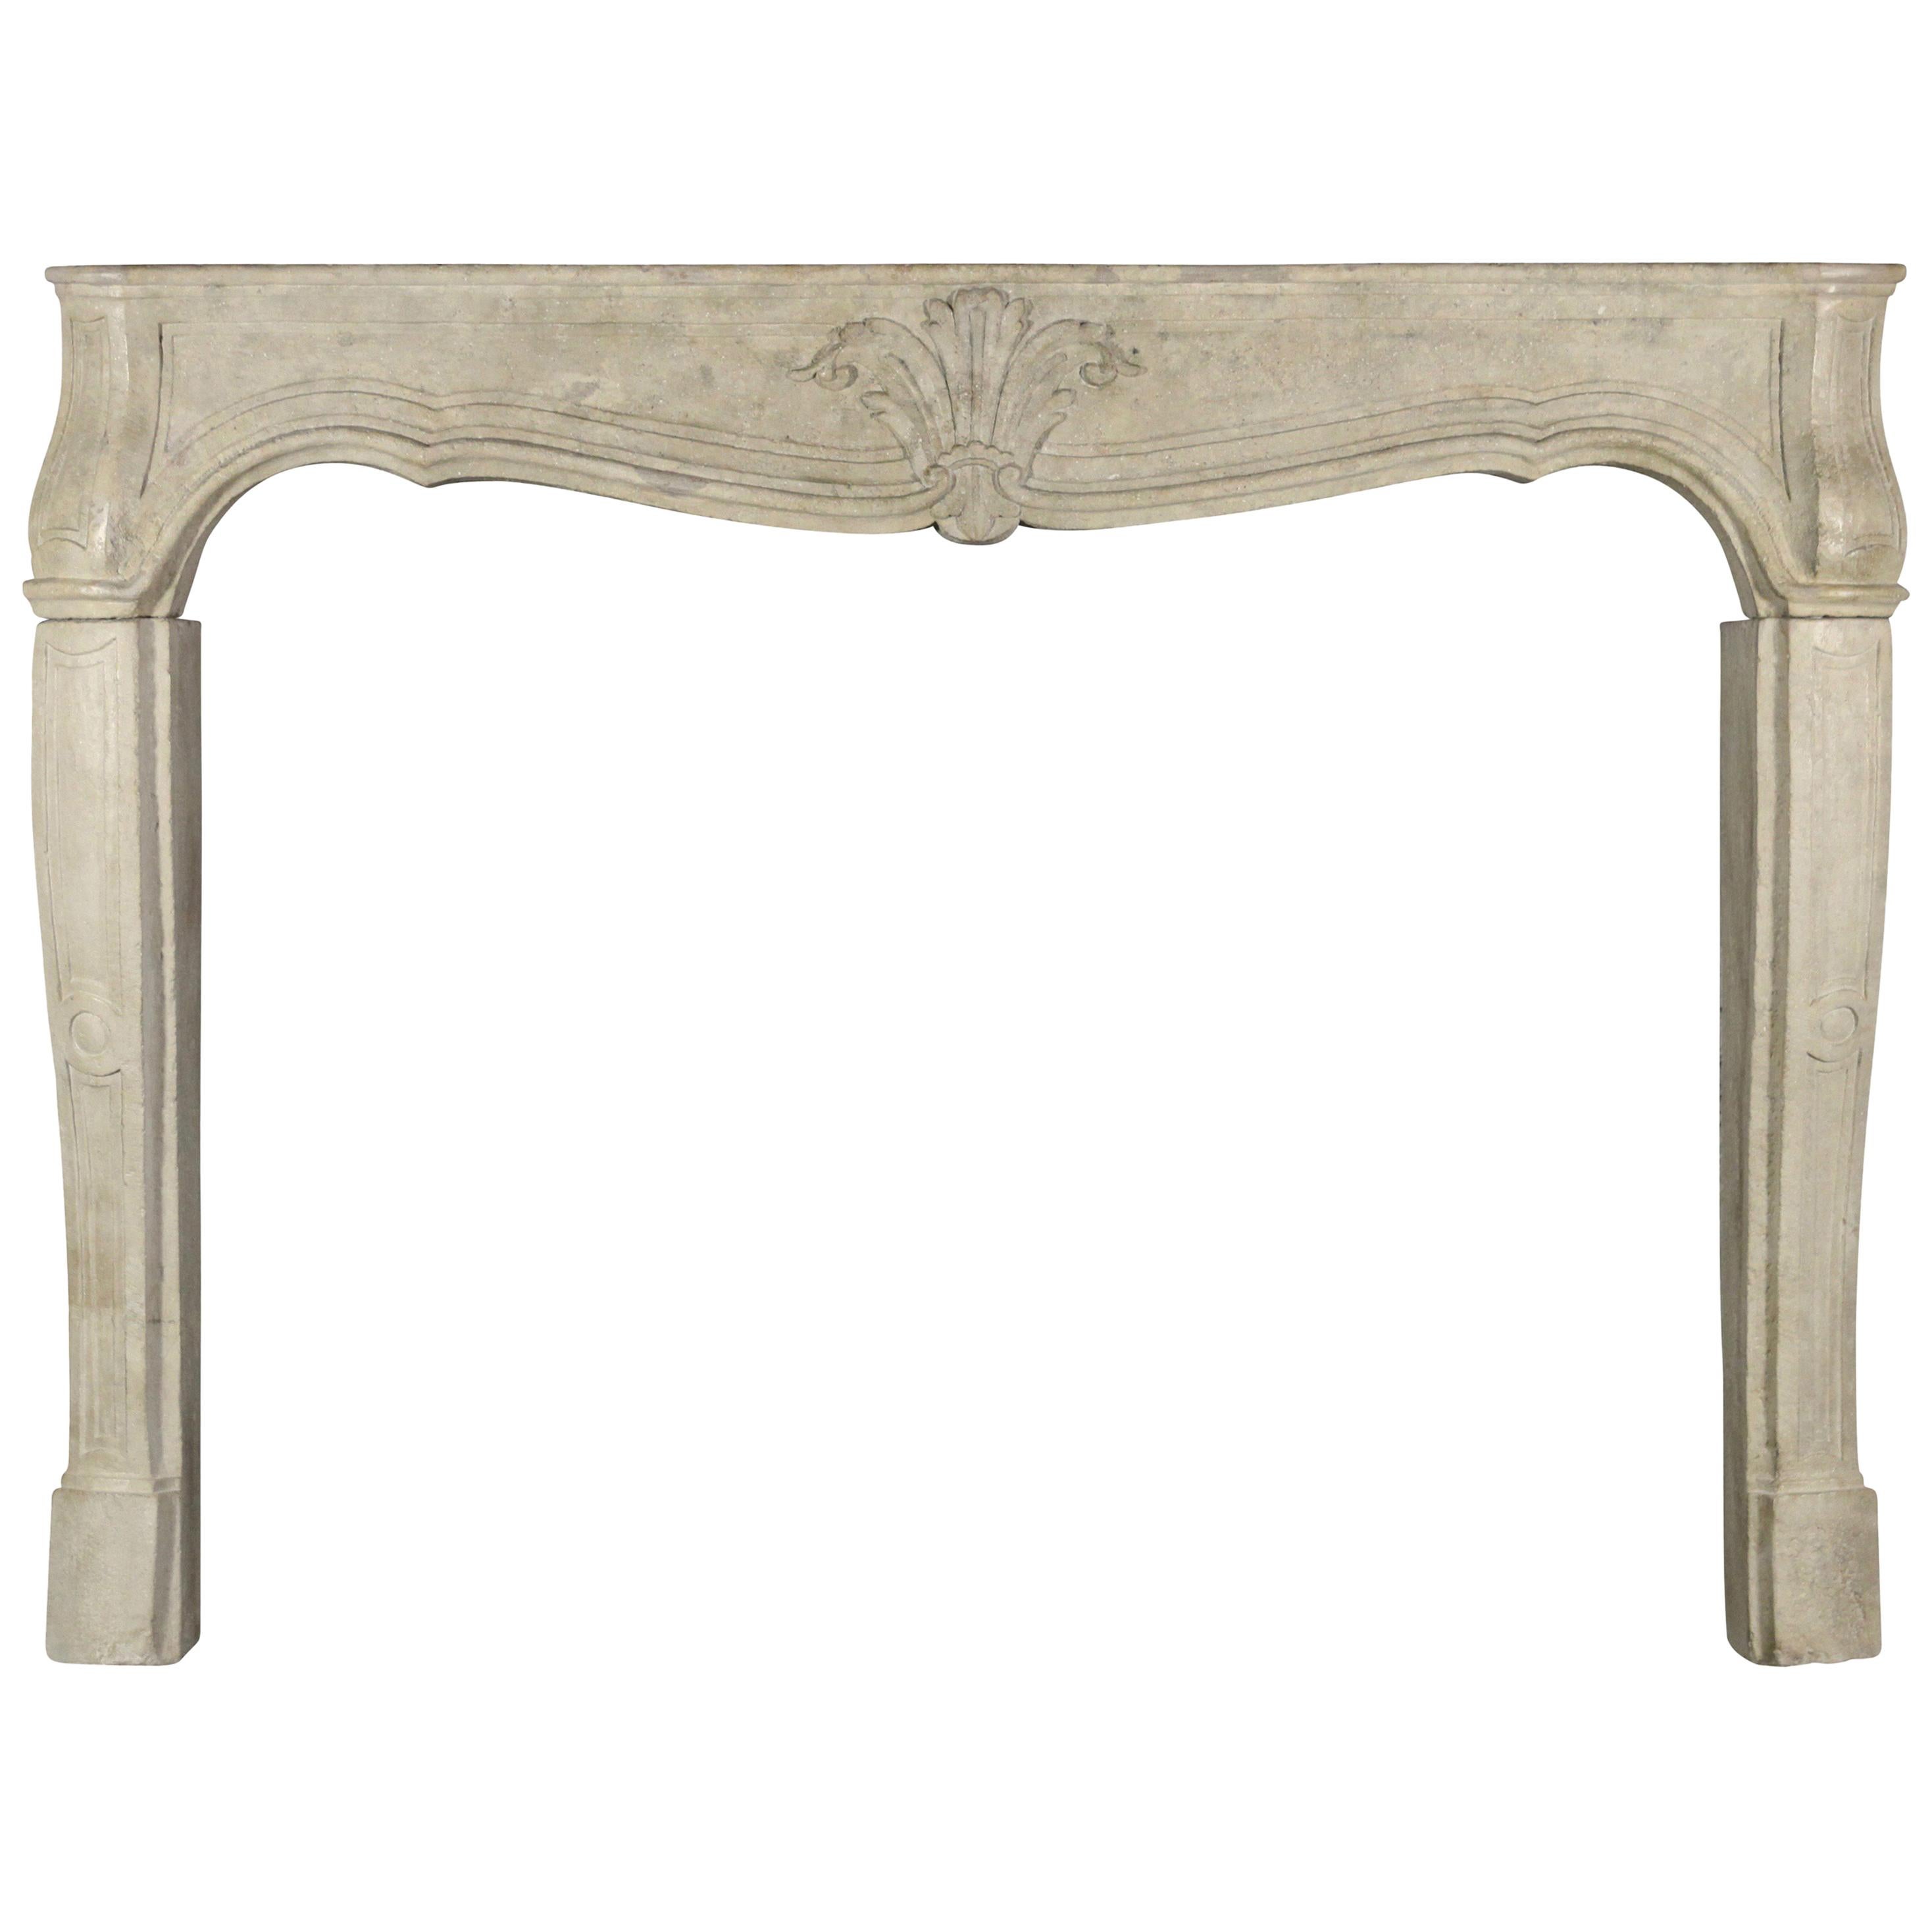 18th Century Fine European Antique French Country Limestone Fireplace Mantle